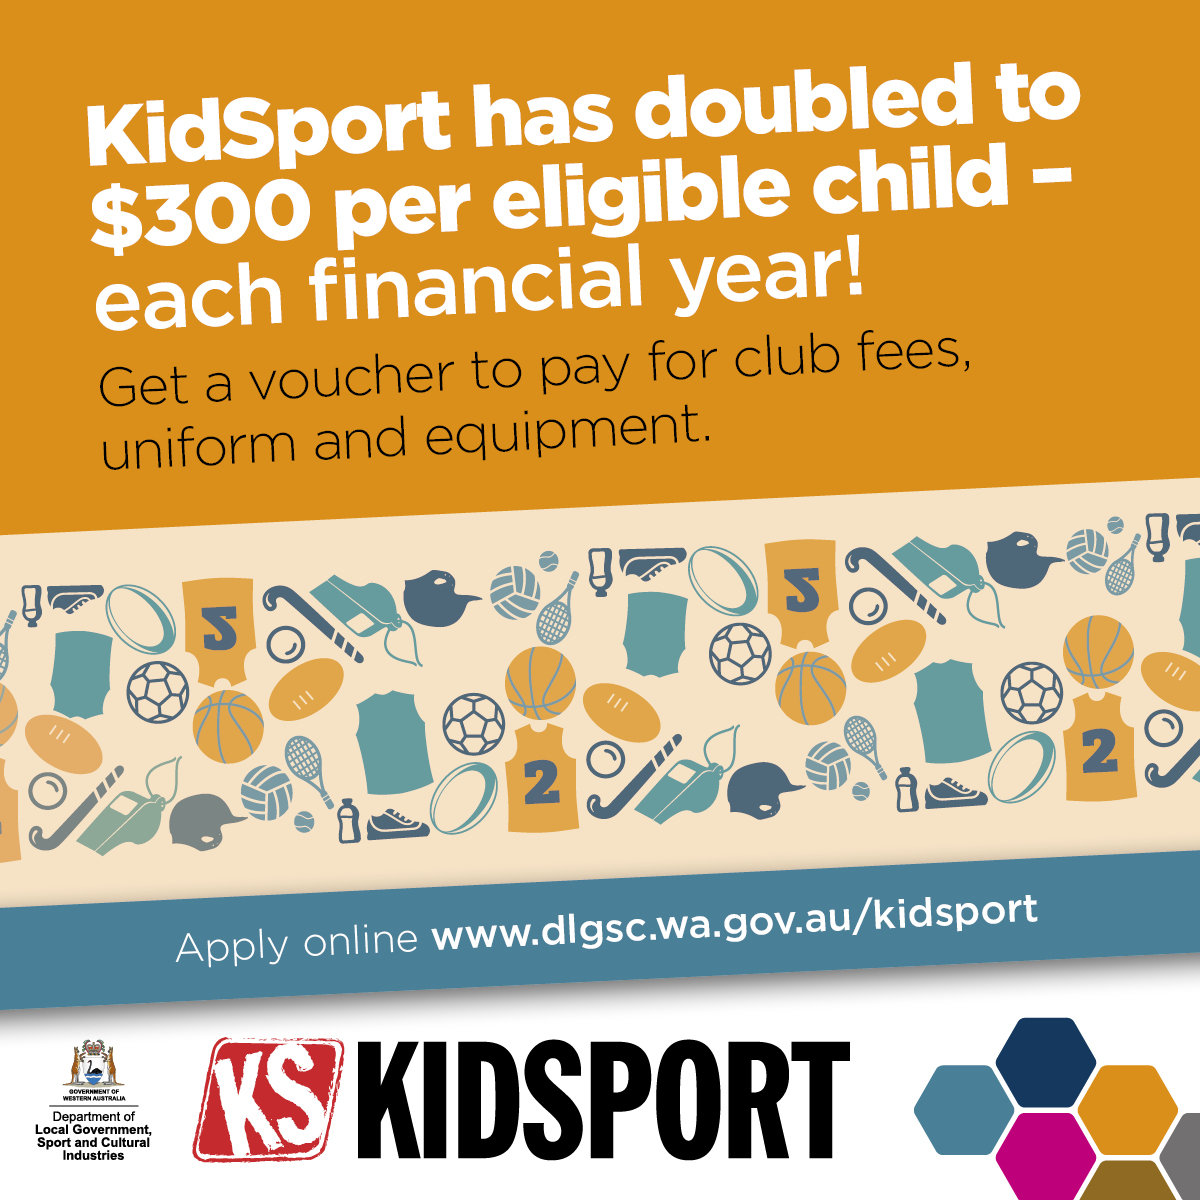 KidSport has doubled to $300 per eligible chid